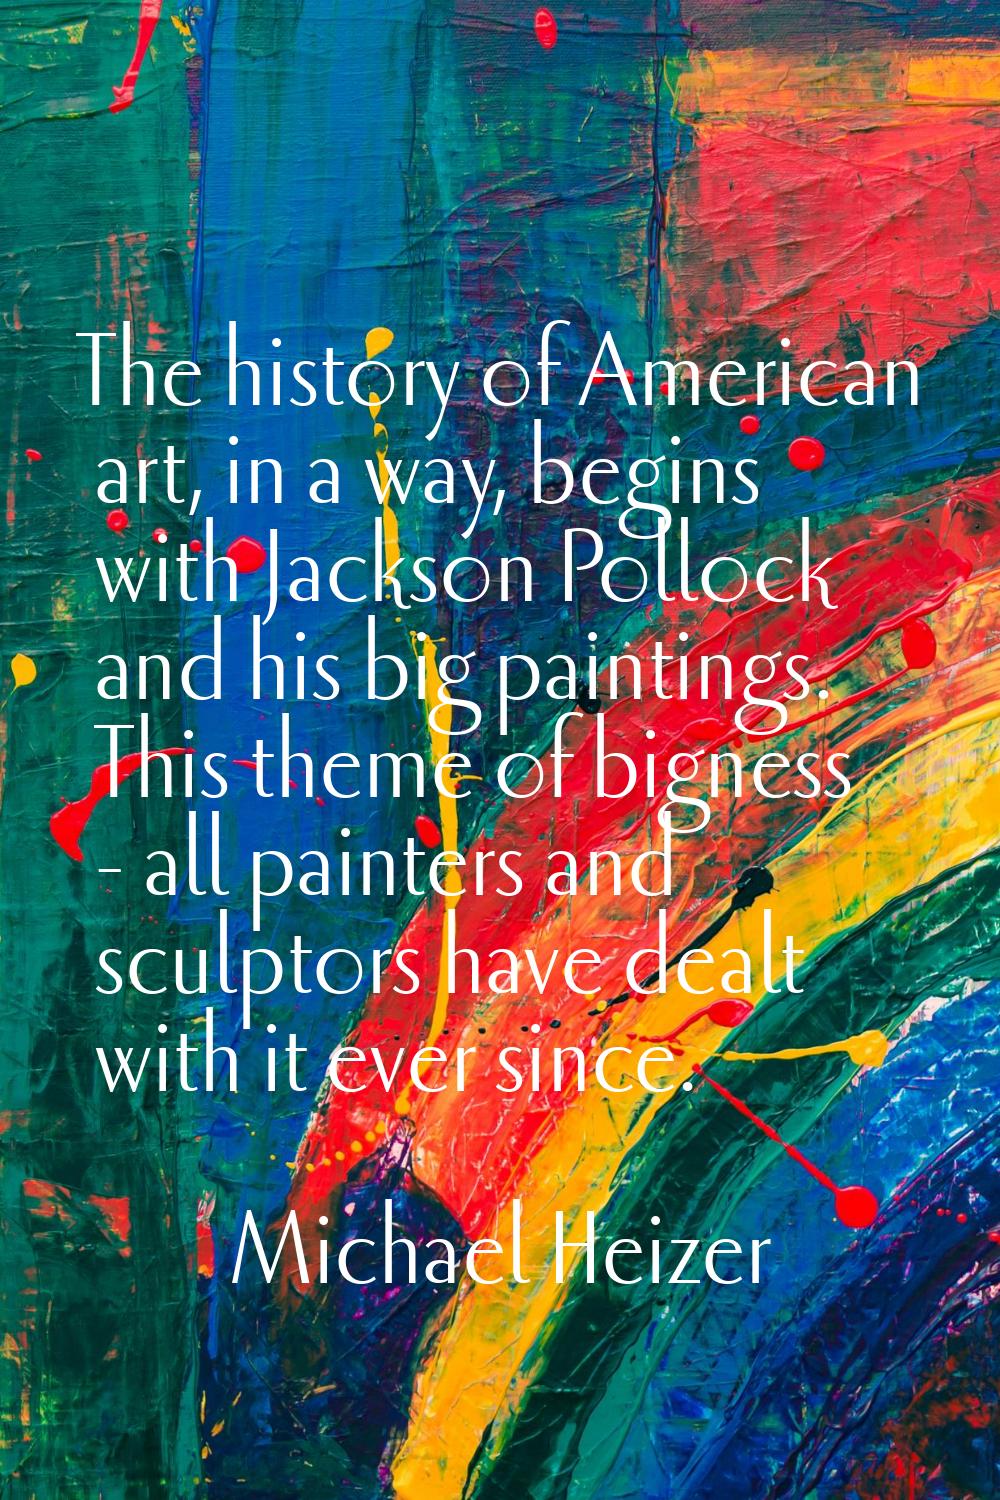 The history of American art, in a way, begins with Jackson Pollock and his big paintings. This them